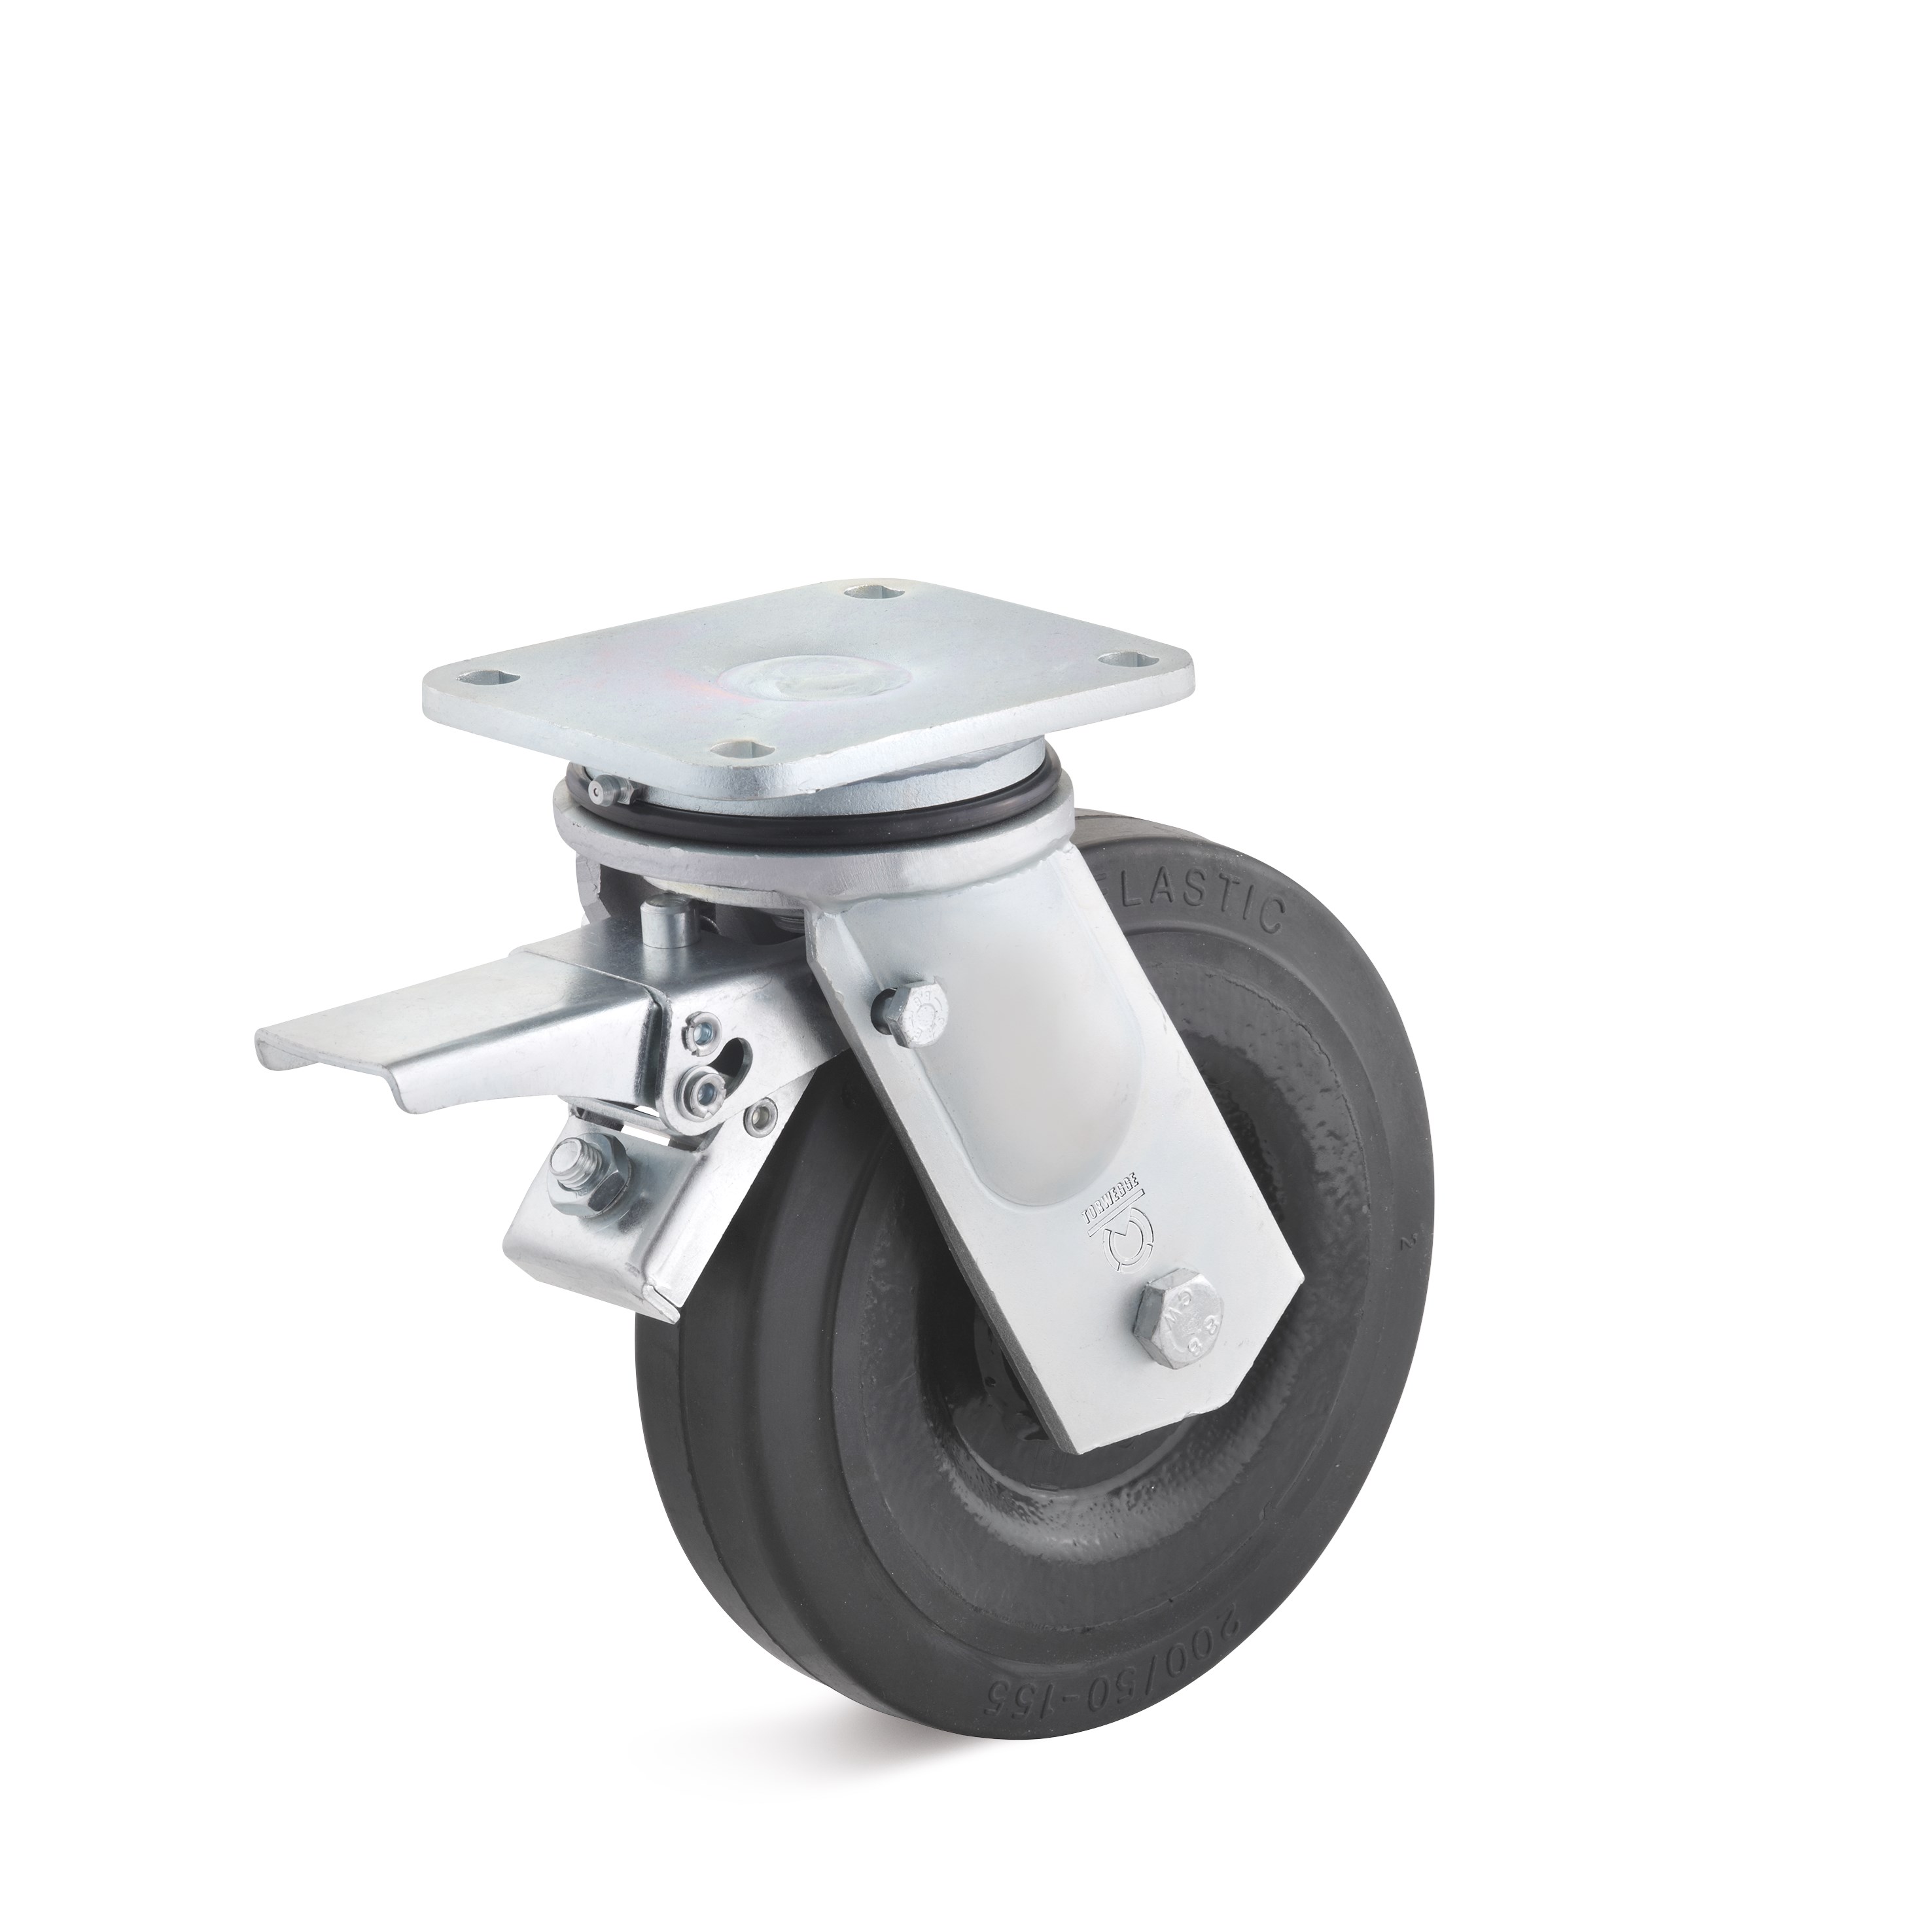 Heavy duty swivel castor with double stop and elastic solid rubber wheel